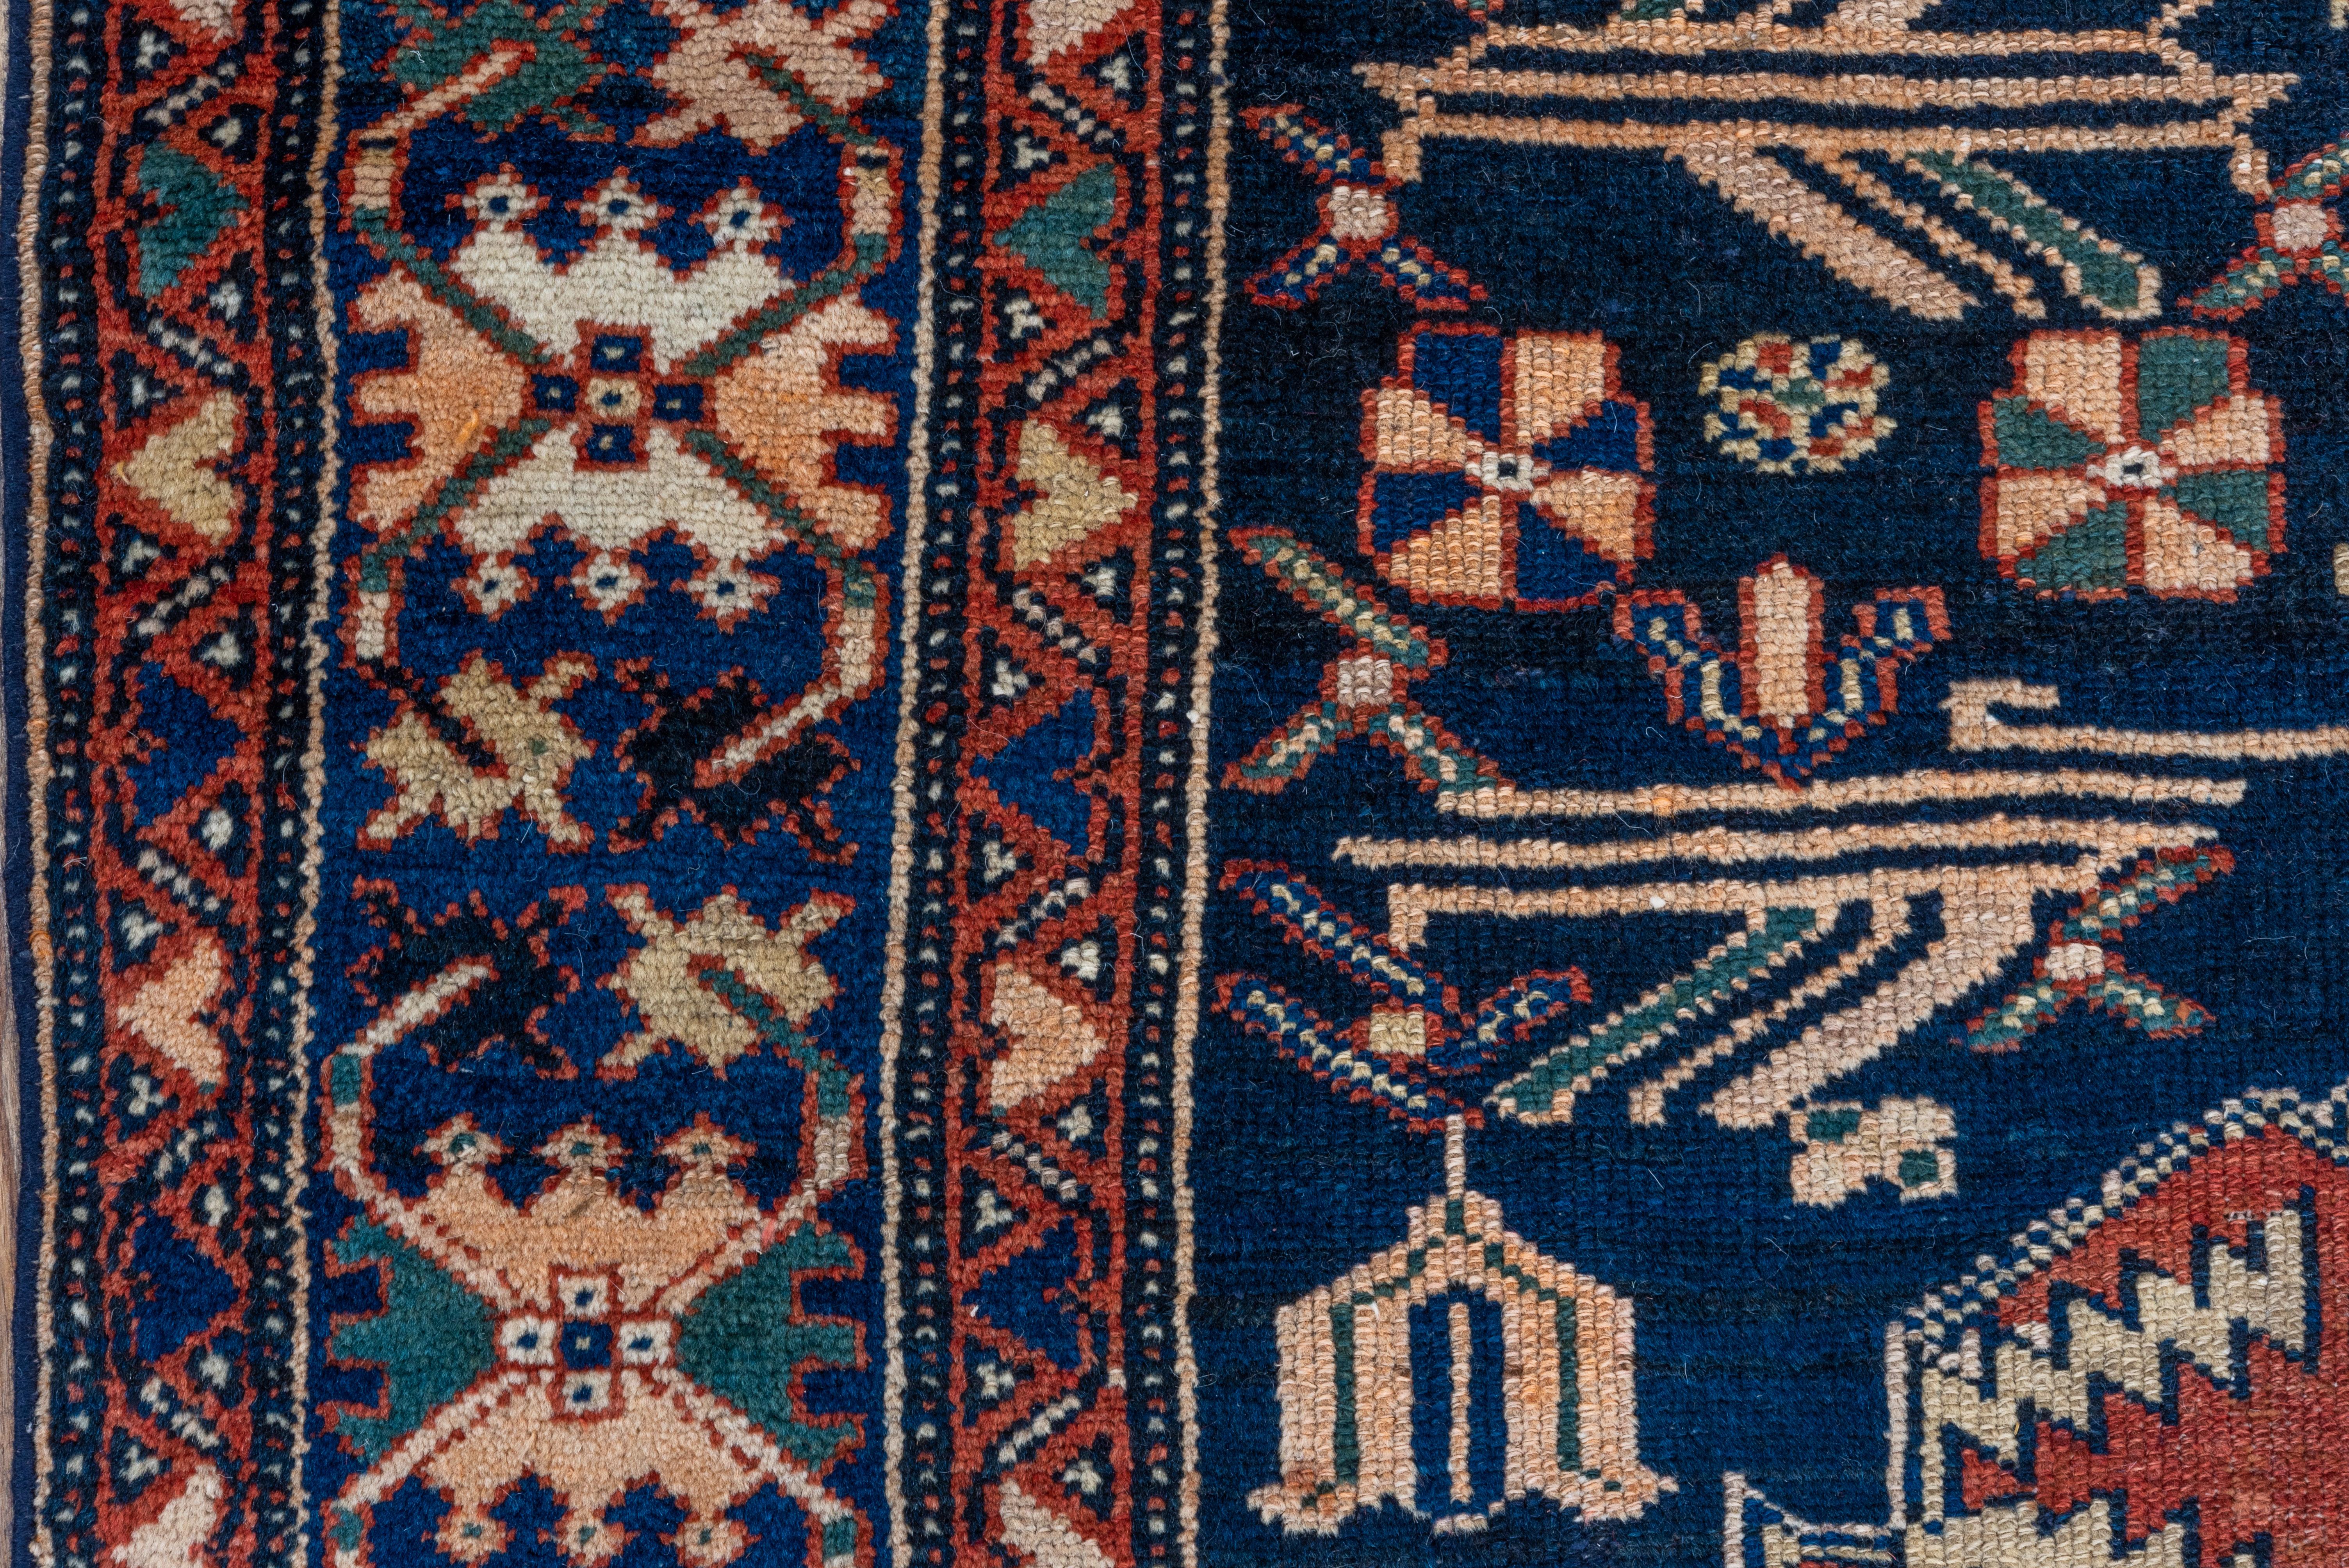 Antique Persian Malayer Rug, Blue Field, Teal Accents In Good Condition For Sale In New York, NY